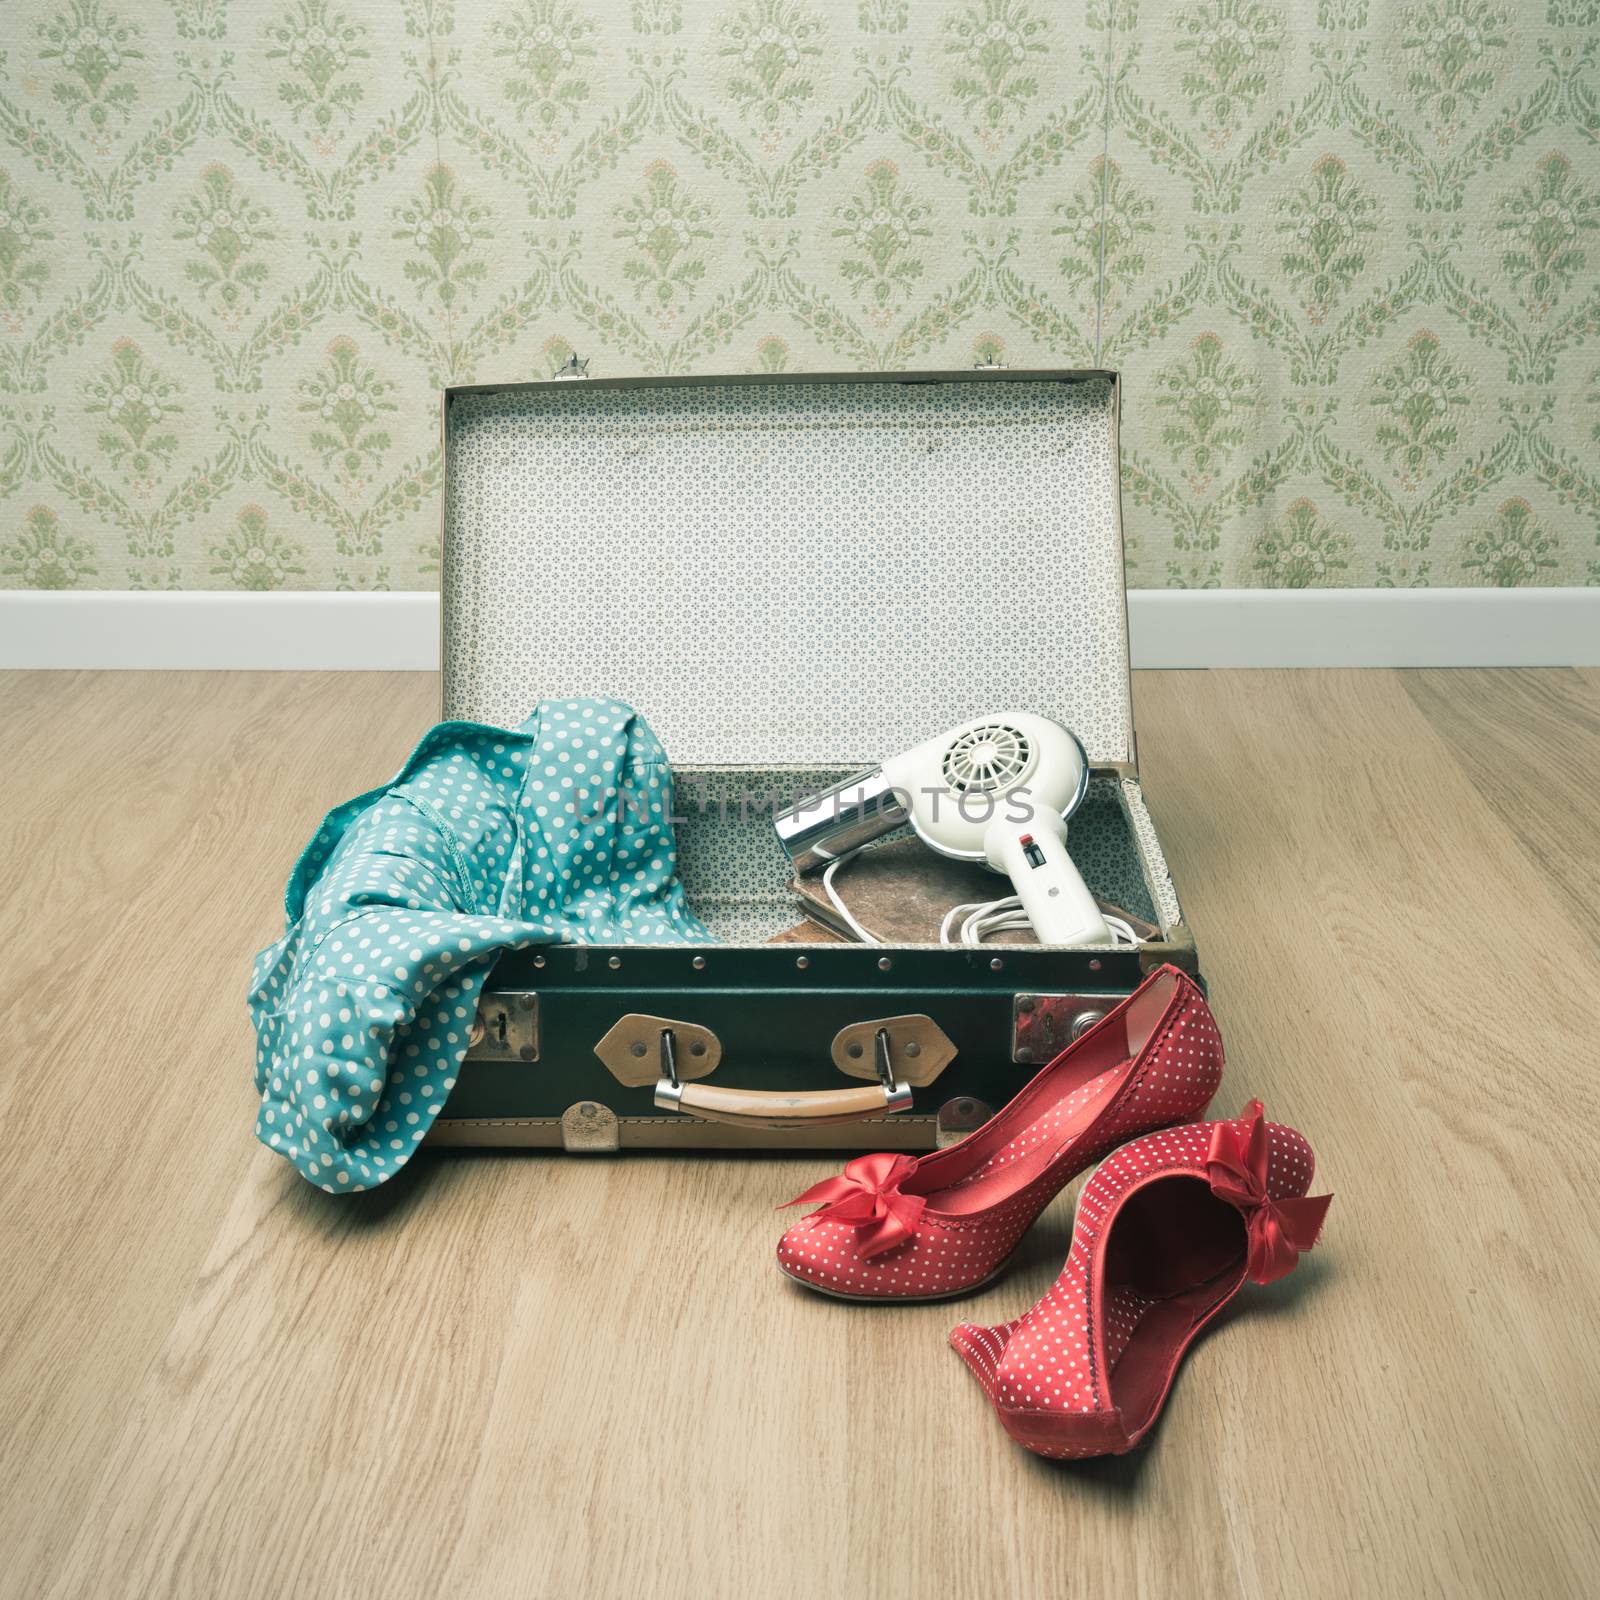 Open vintage suitcase with red shoes and dotted clothing, retro wallpaper on background.